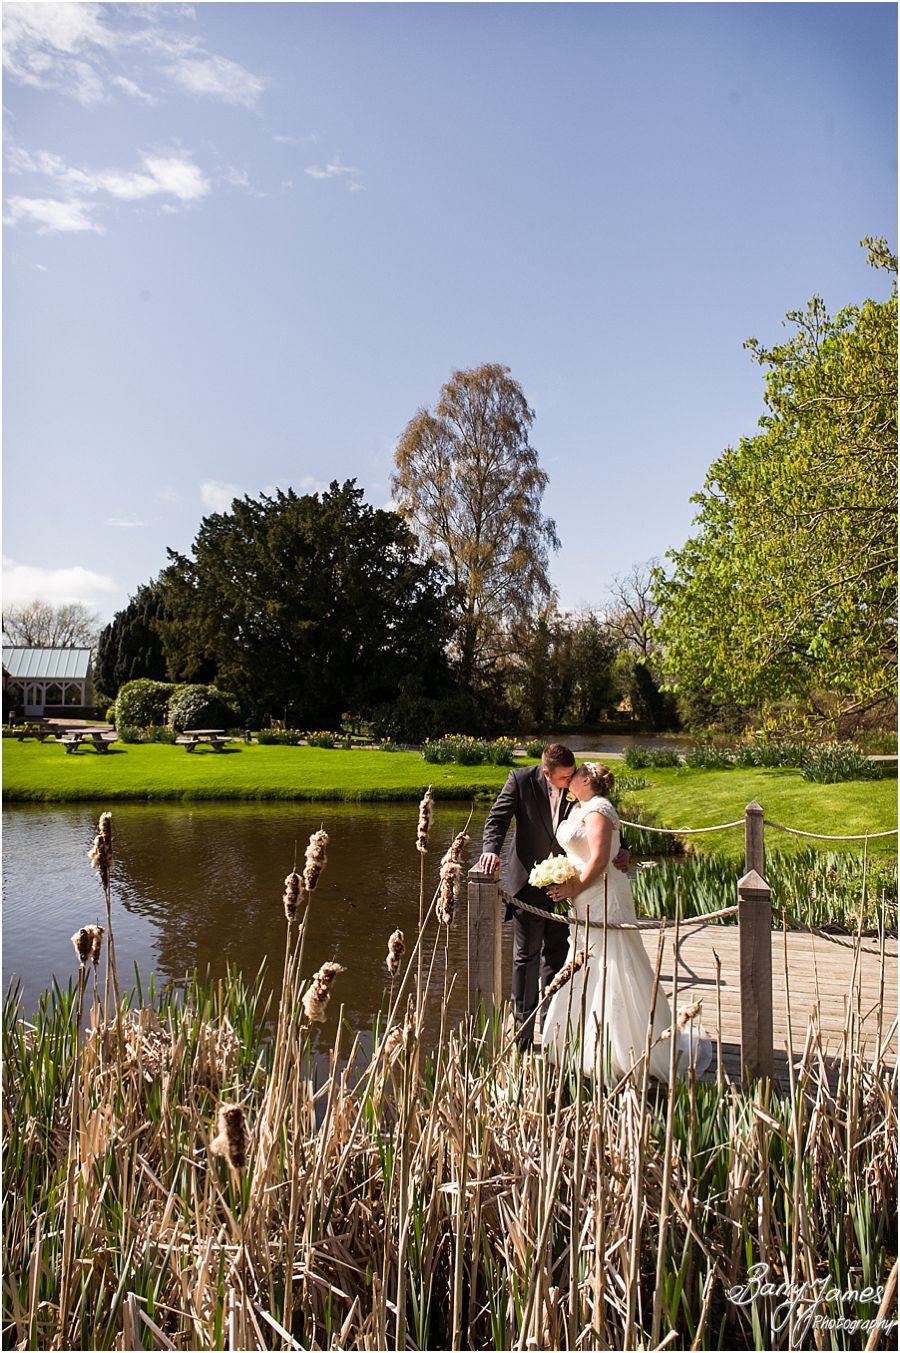 Unobtrusive, relaxed wedding photographs at The Moat House in Acton Trussell that tell the beautiful wedding story by Acton Trussell Wedding Photographer Barry James